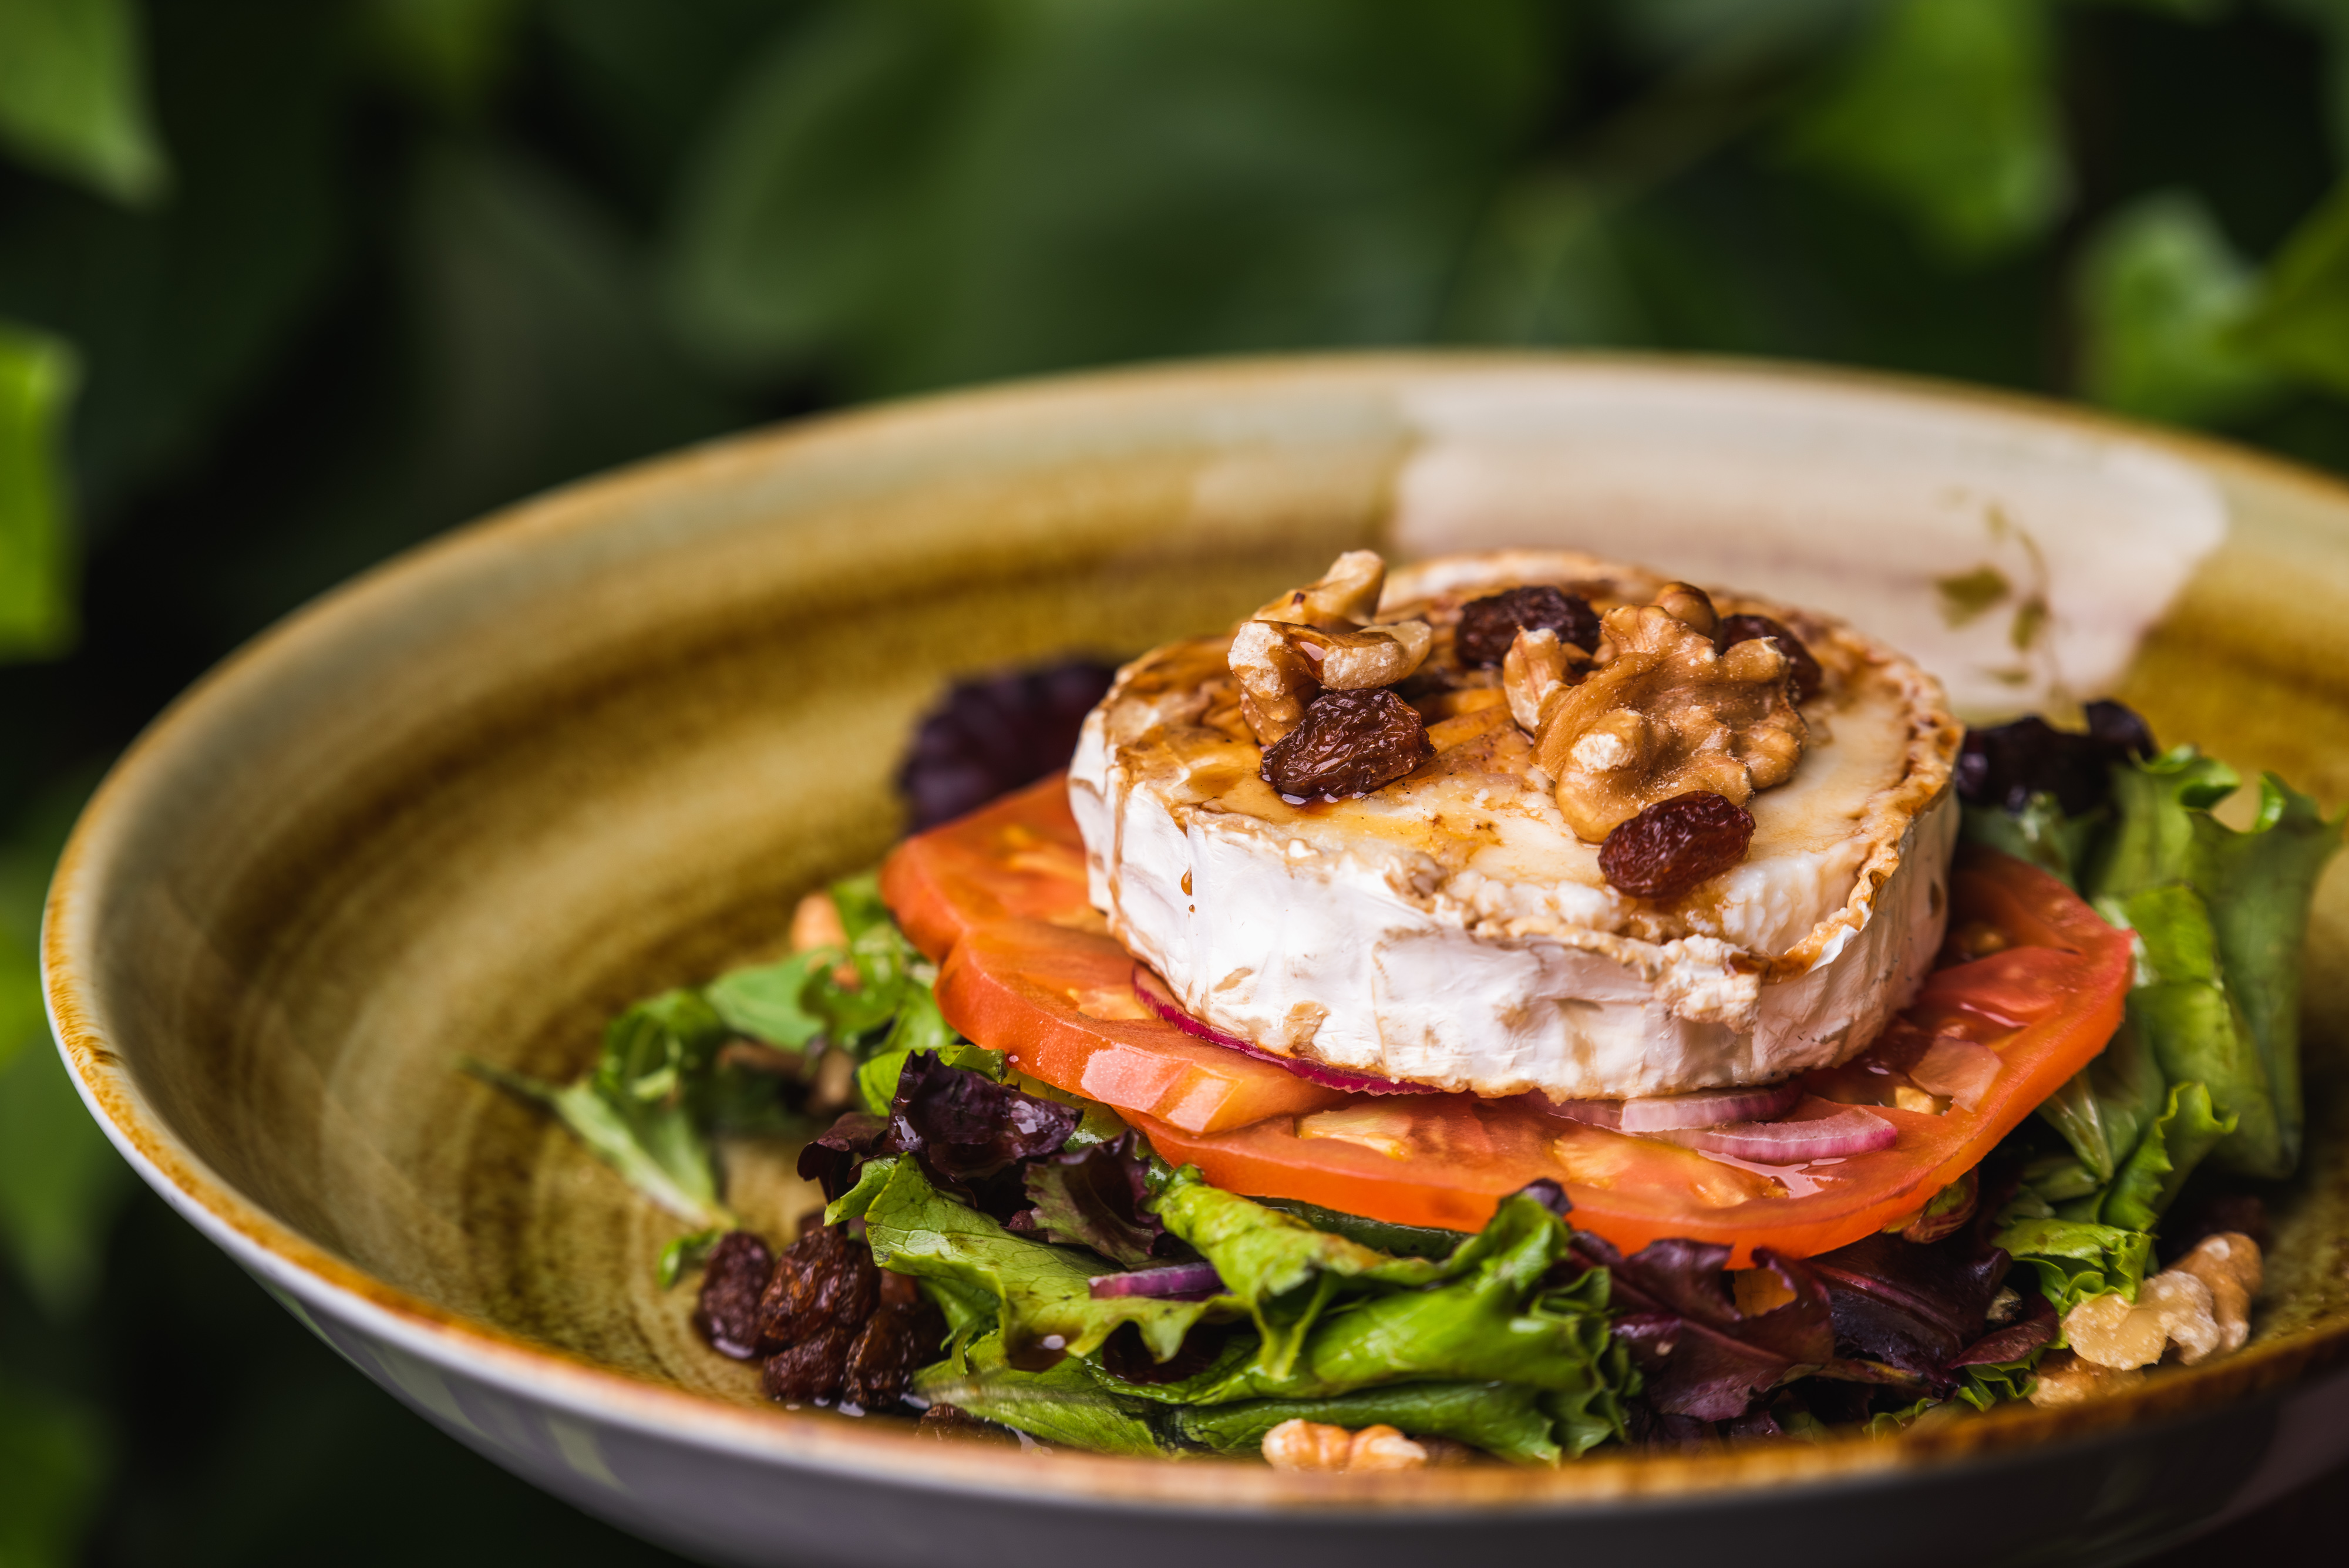 Goat cheese salad with Nuts, raisins, and honey vinaigrette